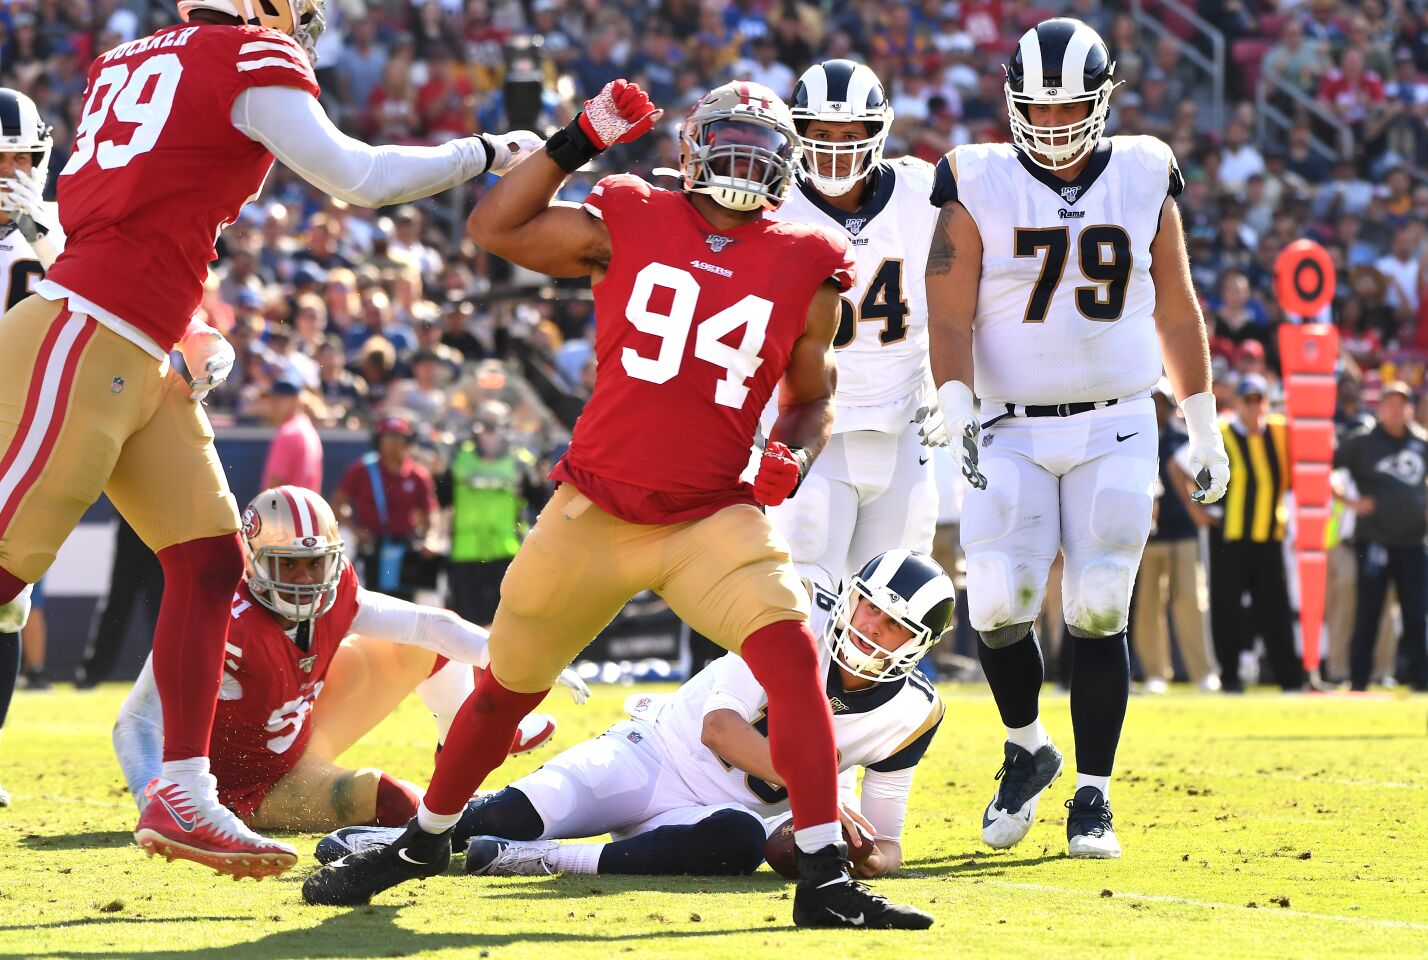 LOS ANGELES, CALIFORNIA OCTOBER 13, 2019-49ers defensive lineman Solomon Thomas (94) celebrates his sack of Rams Jared Goff in the 3rd quarter at the Coliseum Sunday. (Wally Skalij/Los Angeles Times)